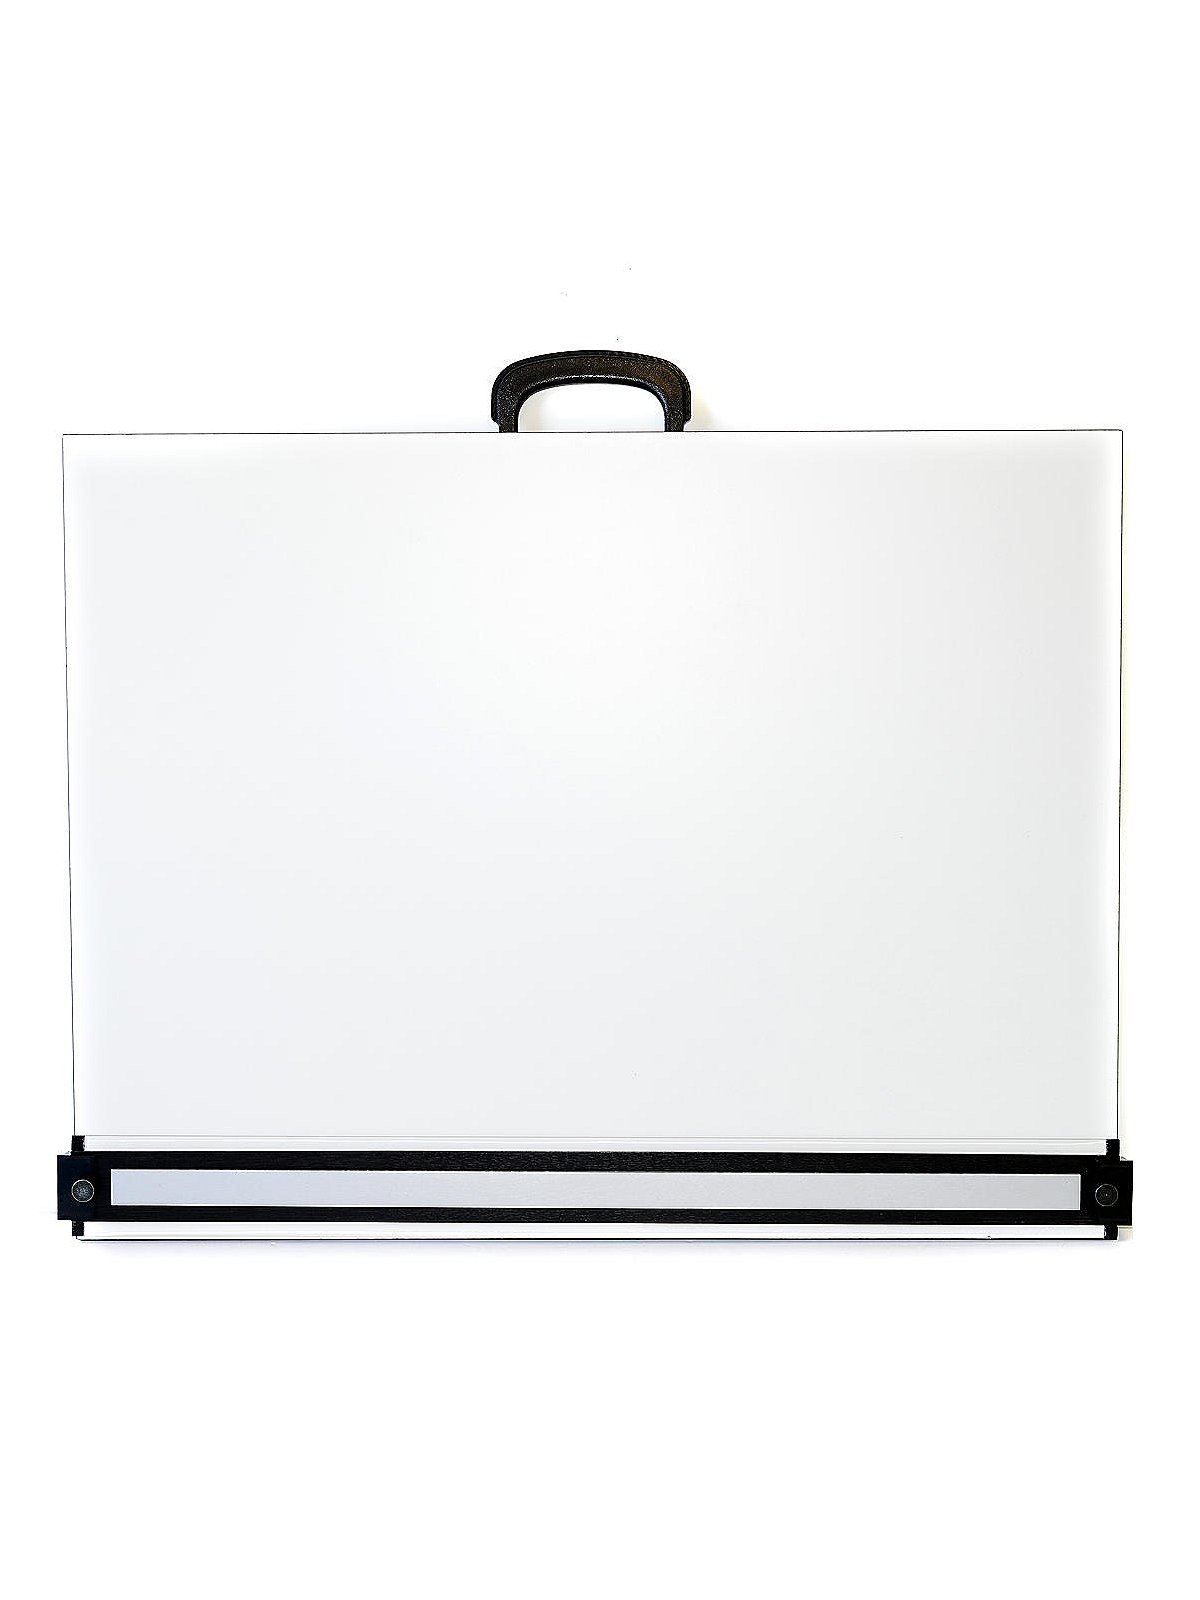 Pacific Arc STB-Series Drawing Board with Parallel Bar, 18 x 24